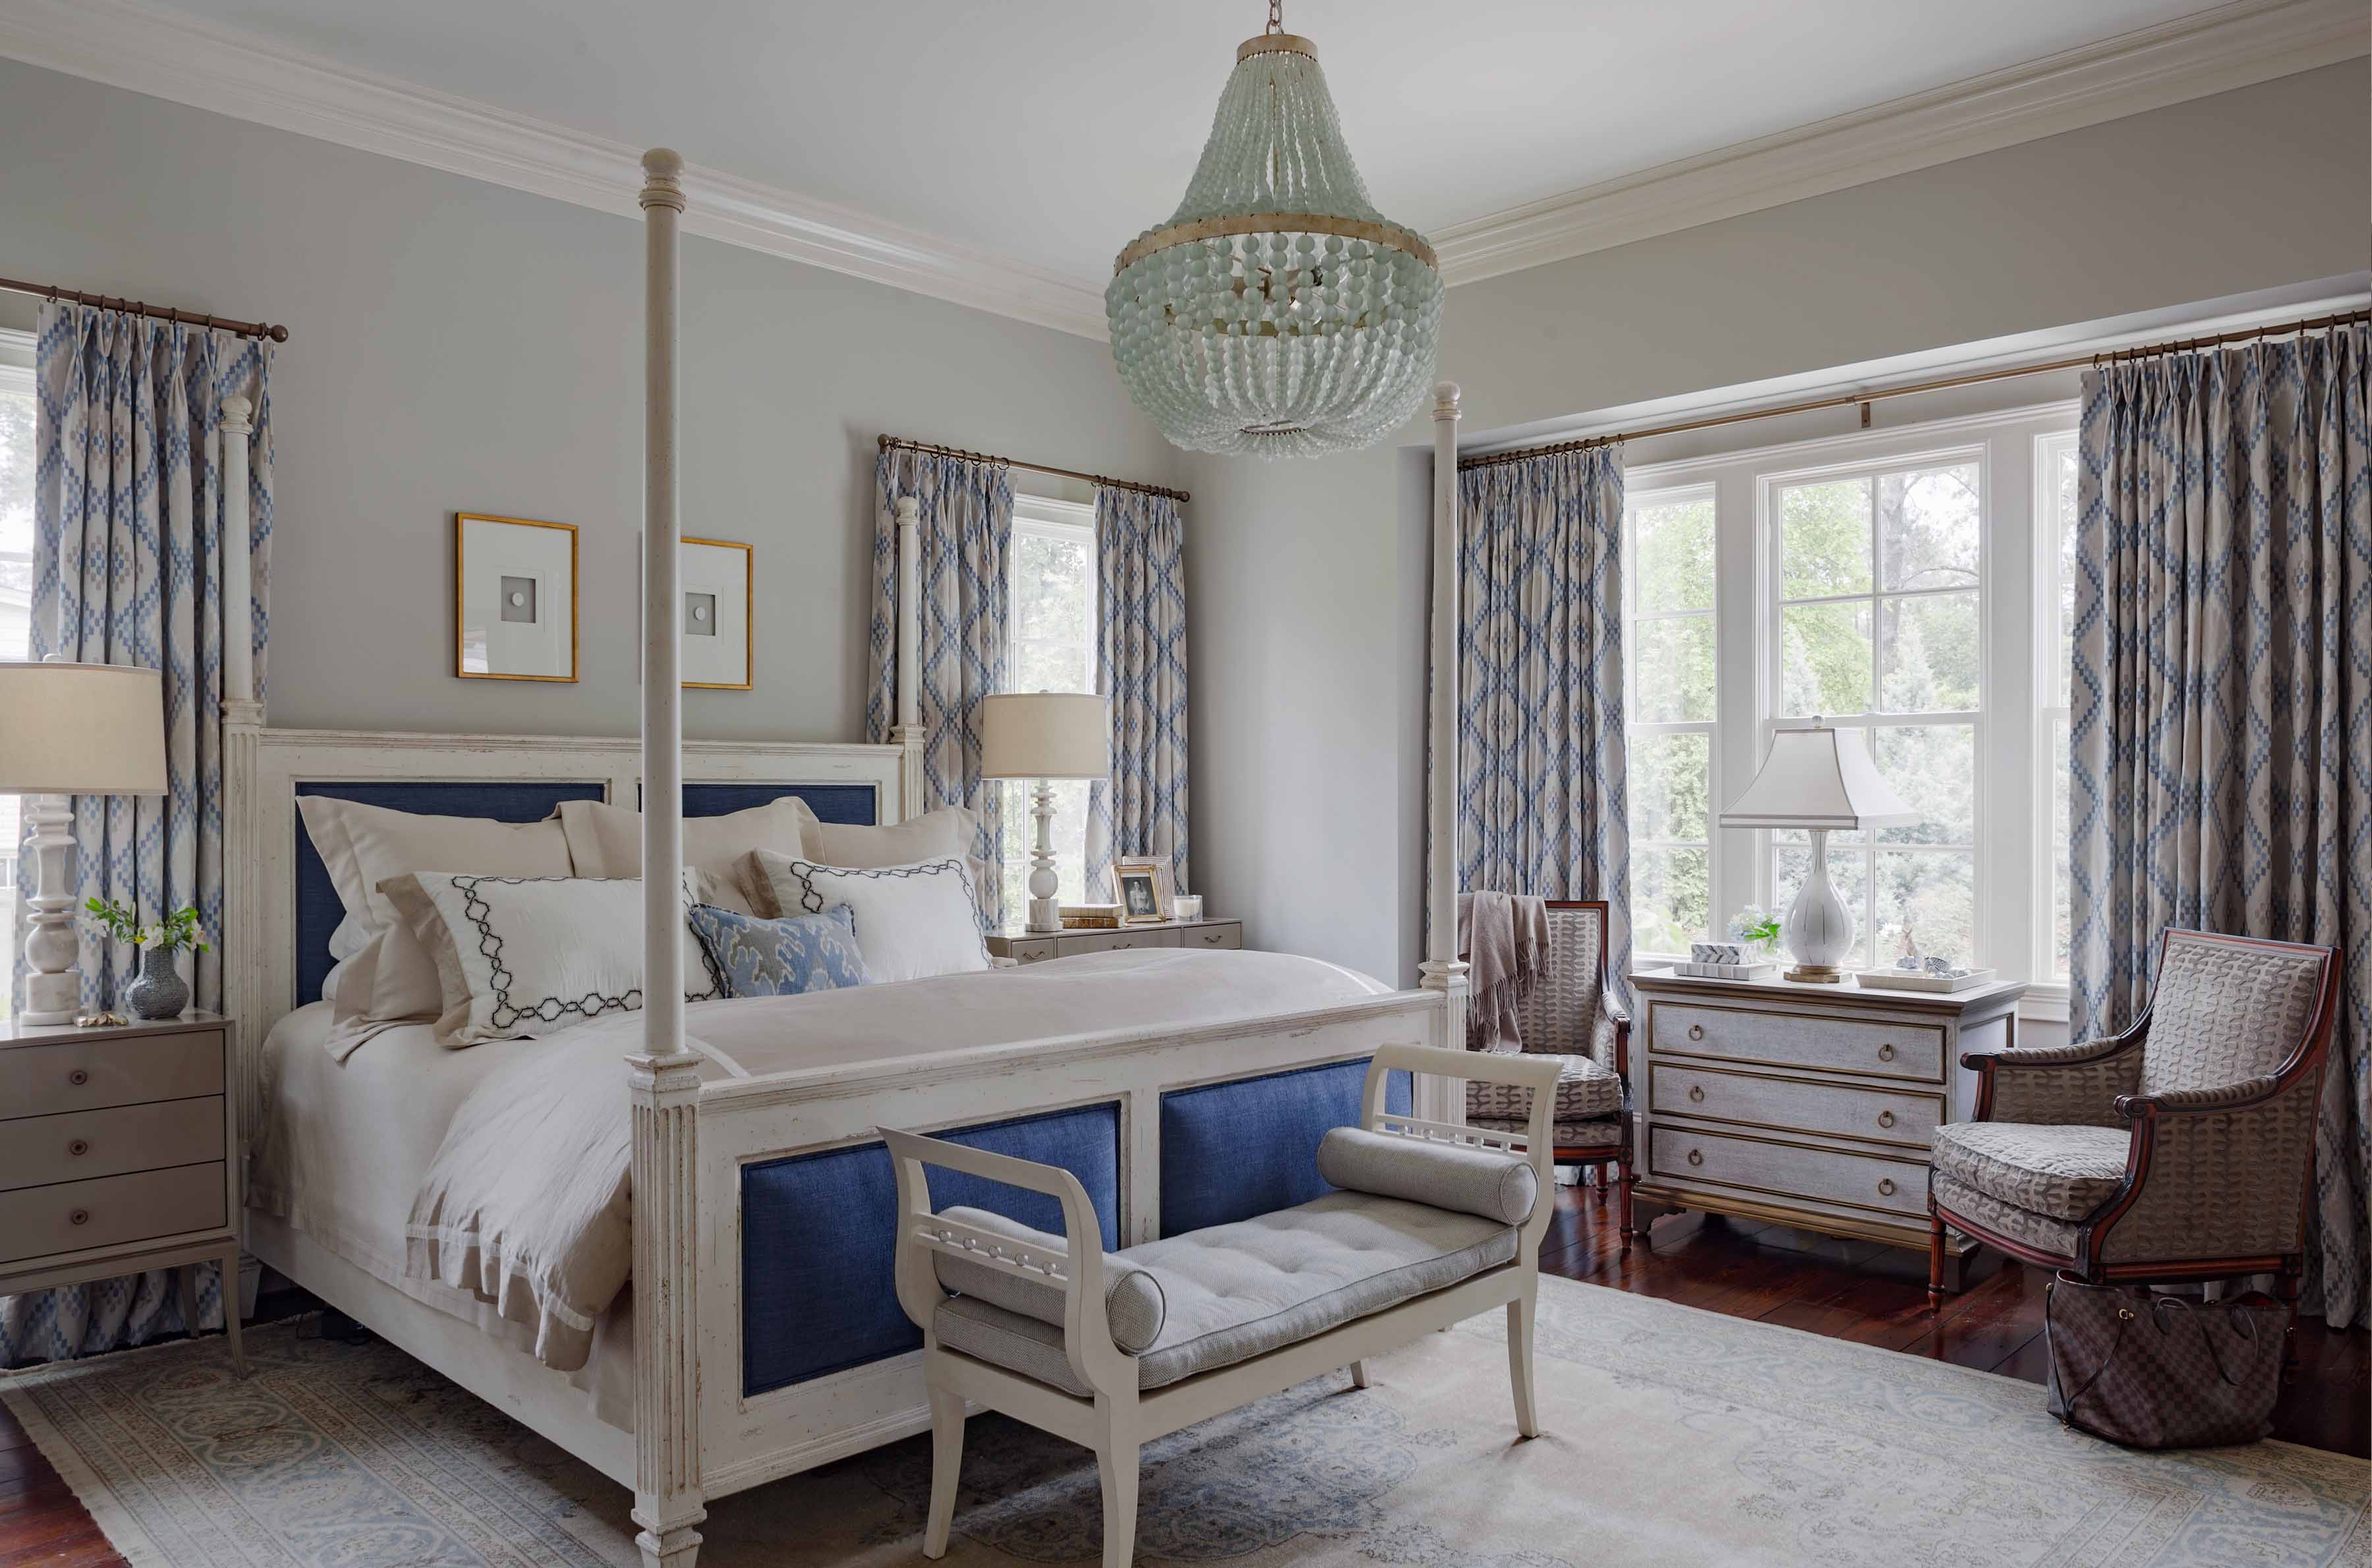 hilton head island decorating projects by Jenny Ladutko of J Banks Design Group reflect the blues of the water and the gracefulness of the low country